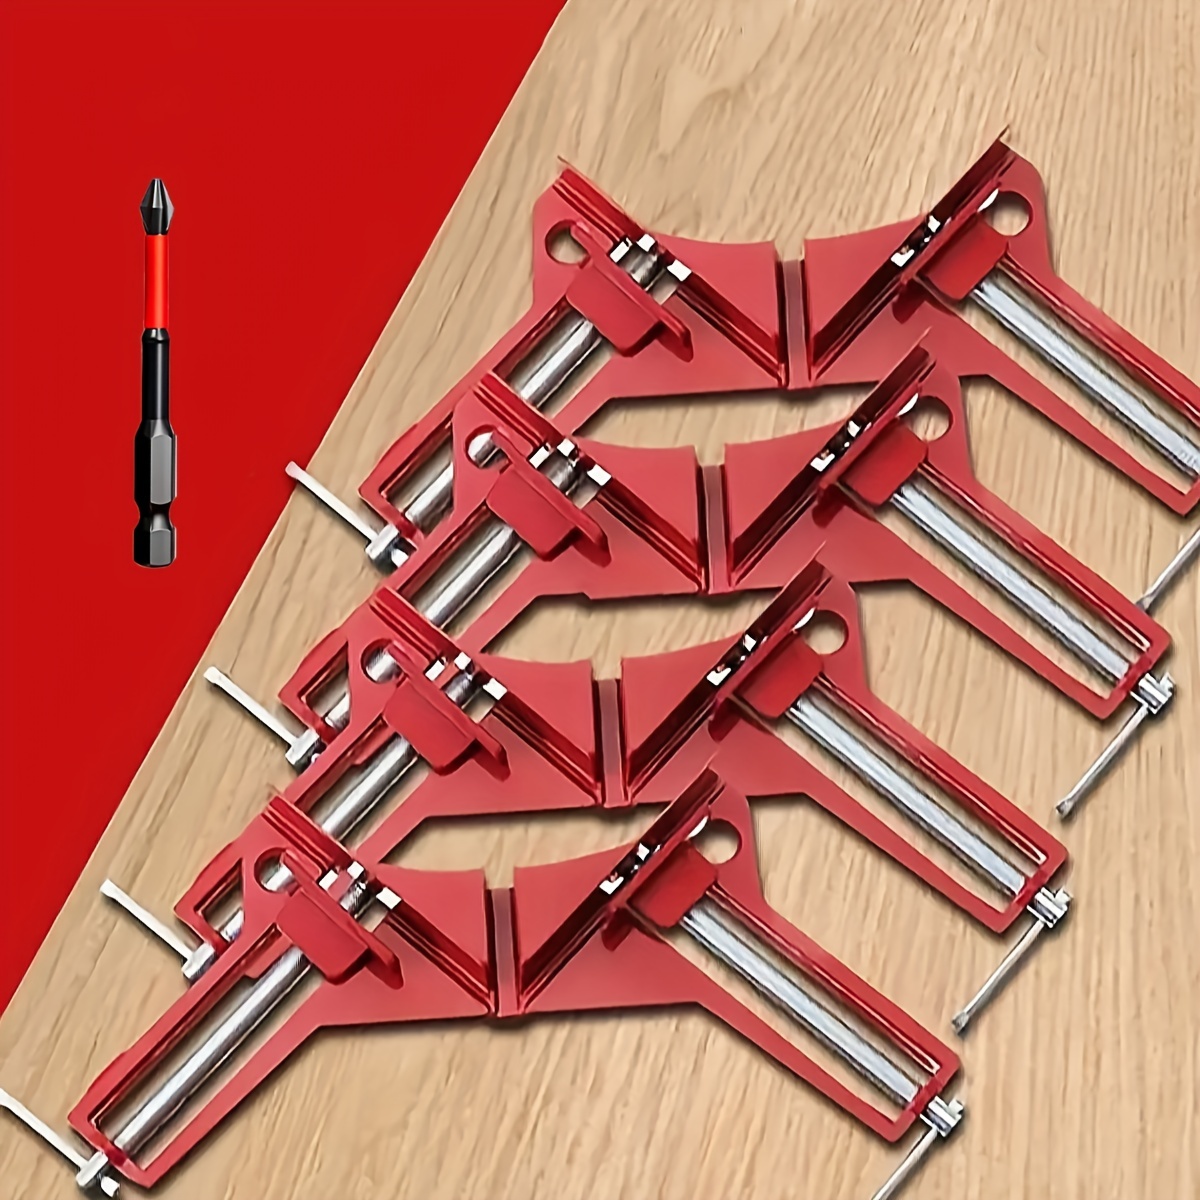 Right Angle Clamp 90 Degree Positioning Holder Woodworking Vice Miter Tool  Set Adjustable Wood Corner Clamps for Boxes,Door